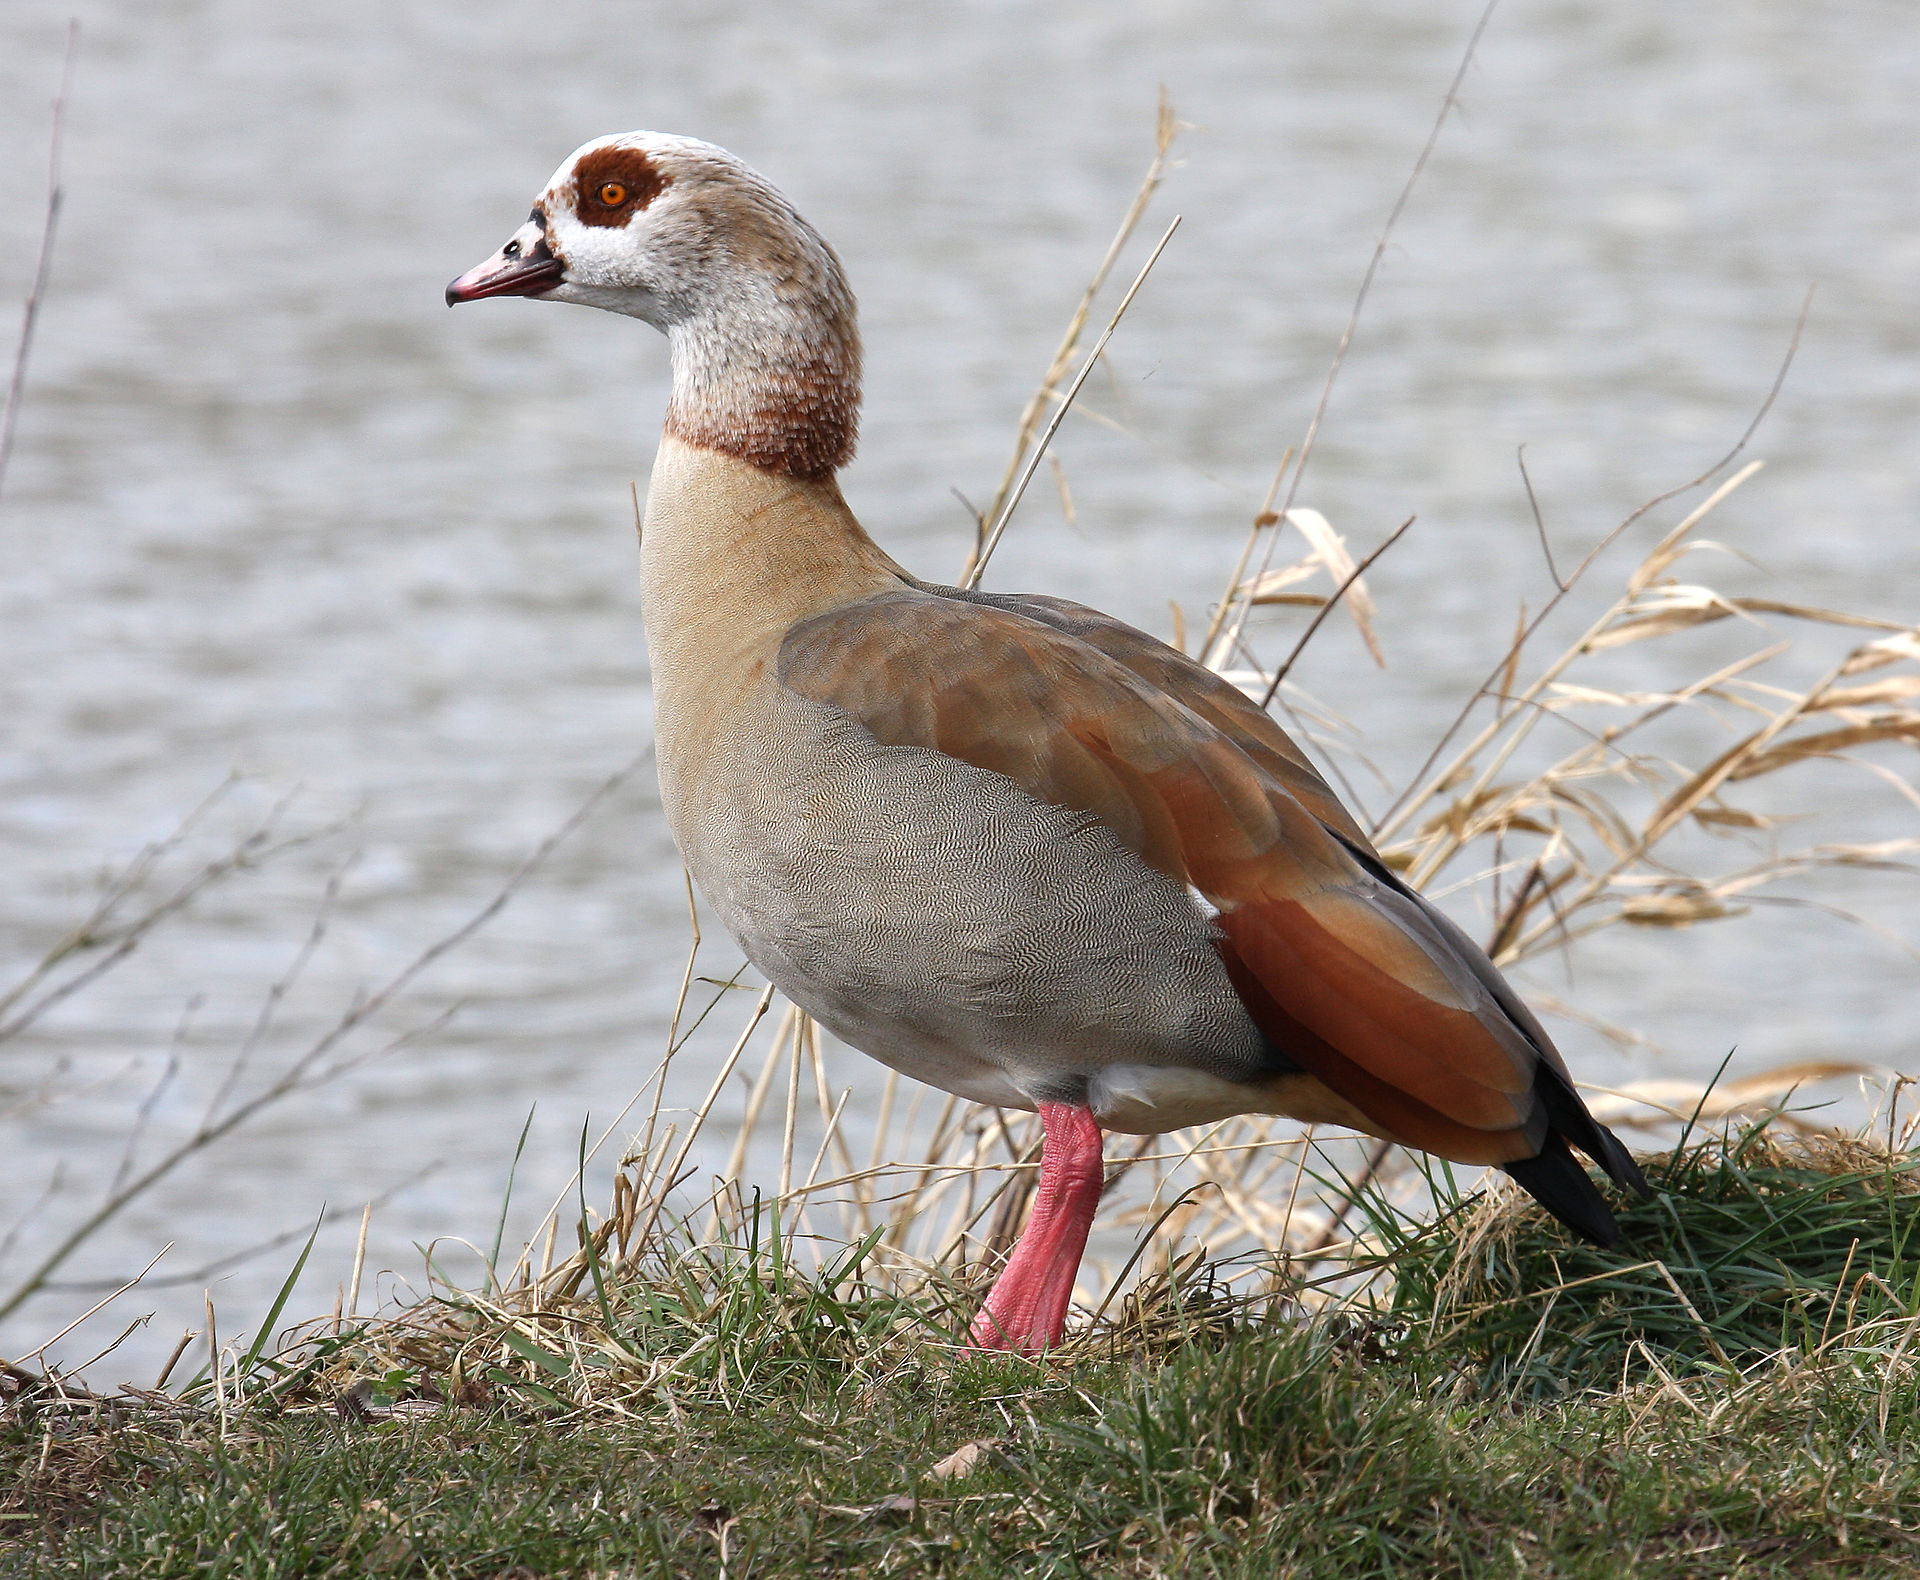 A brown and gray Egyptian goose standing along the water.